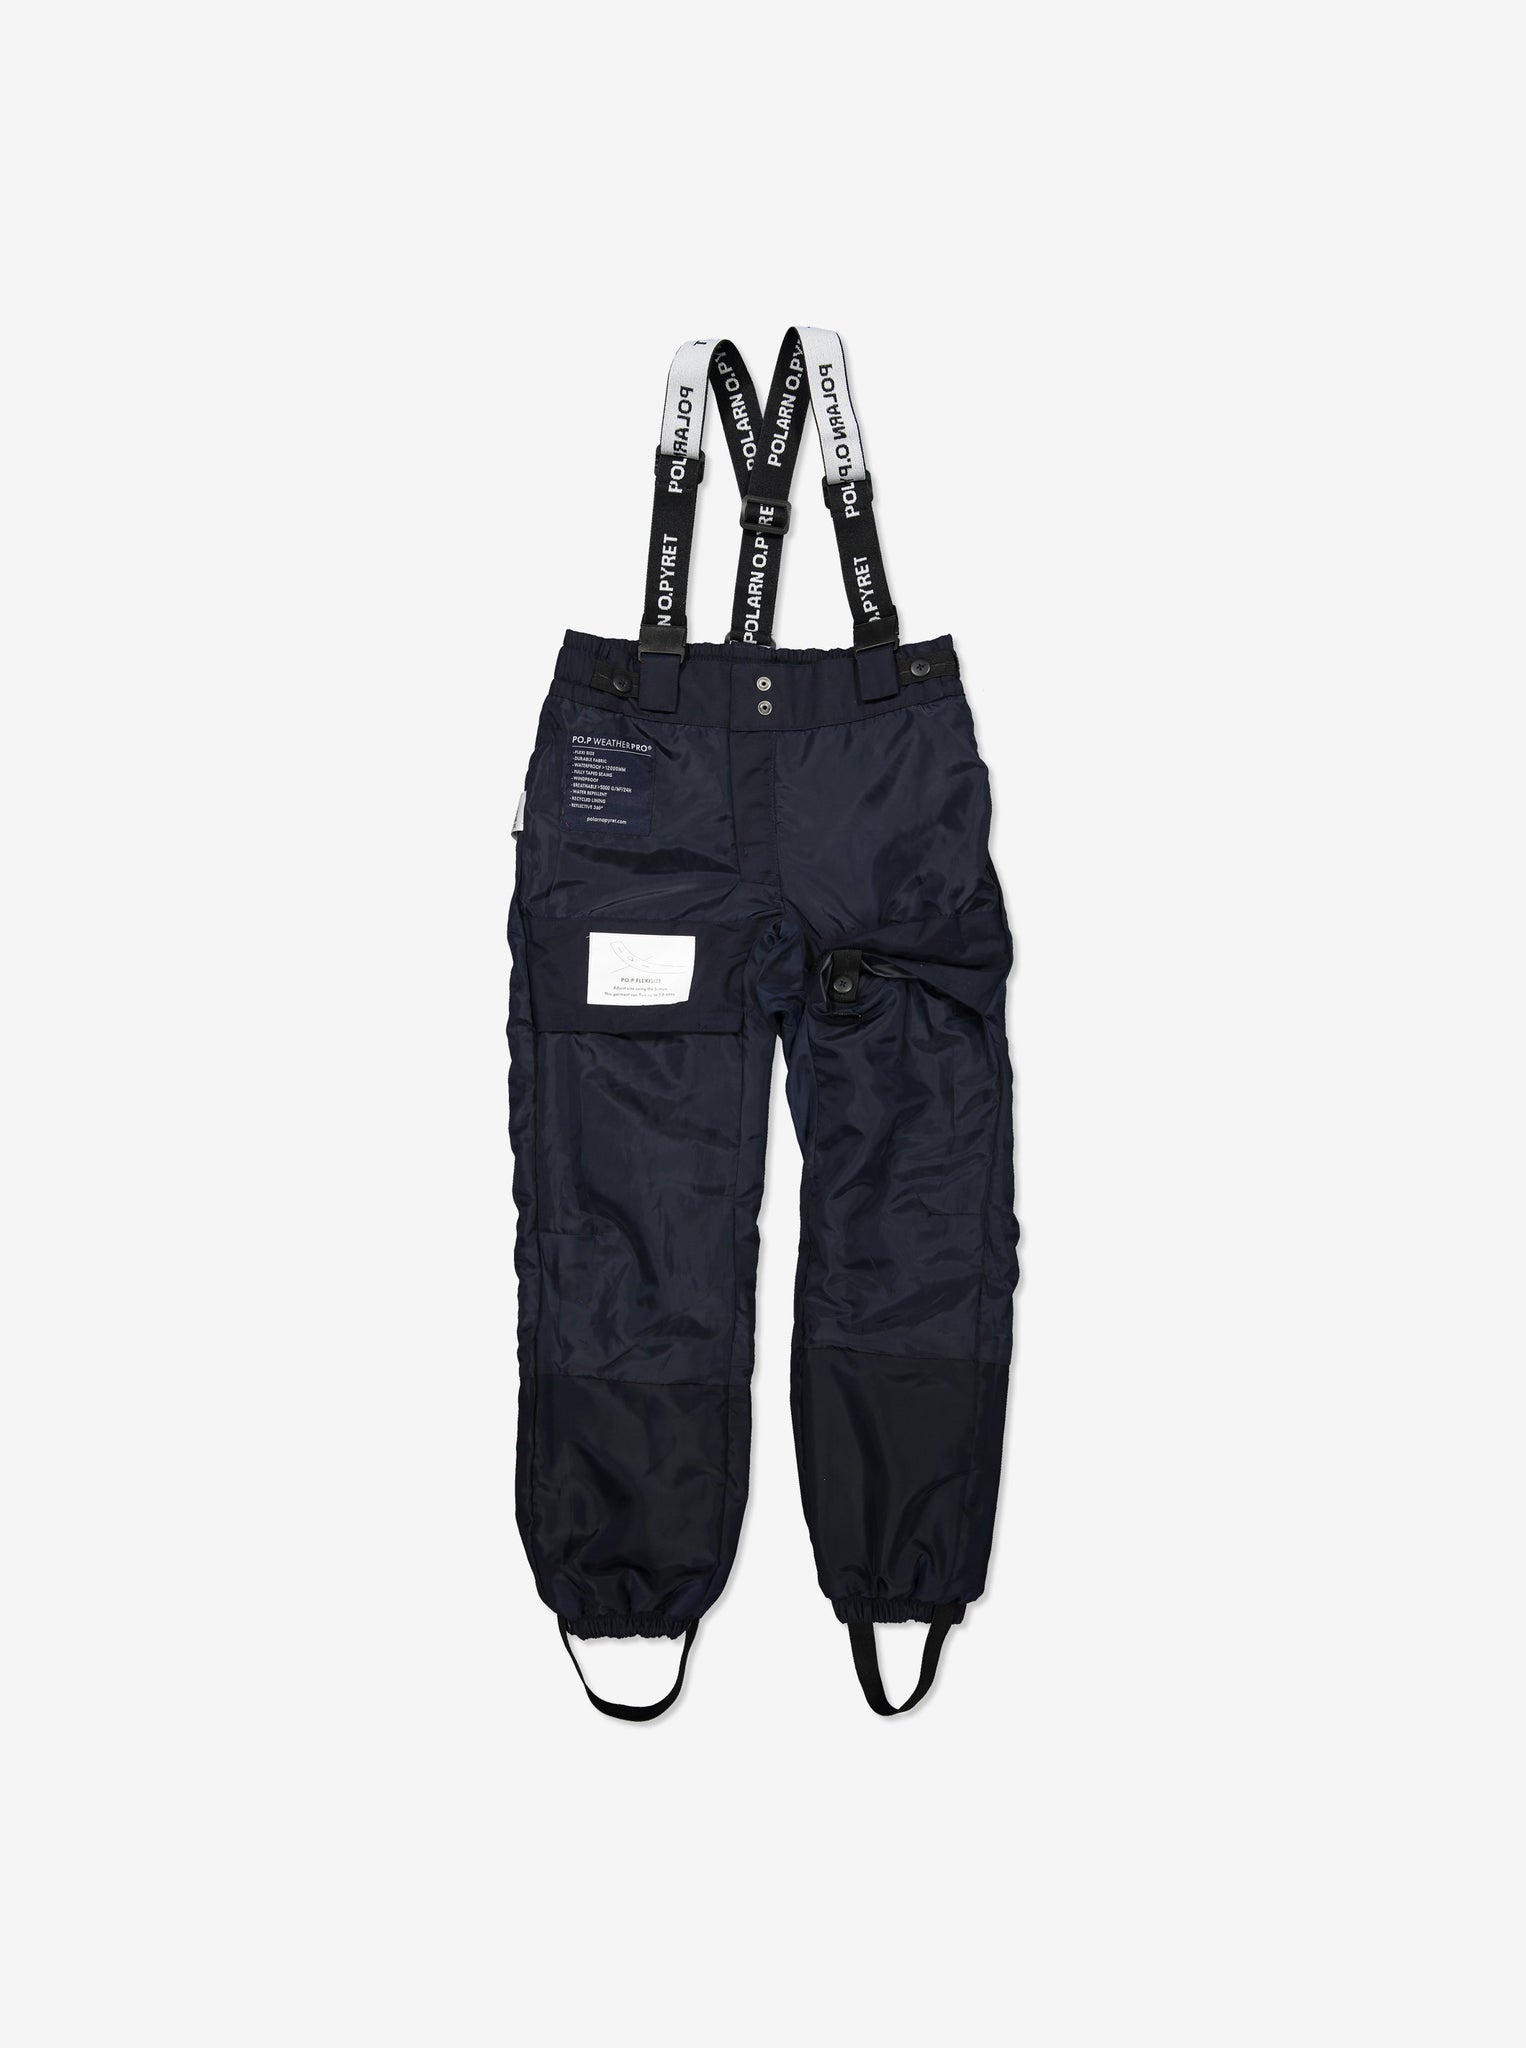 Kids extendable Navy Waterproof Shell Trousers, warm ethical high quality 